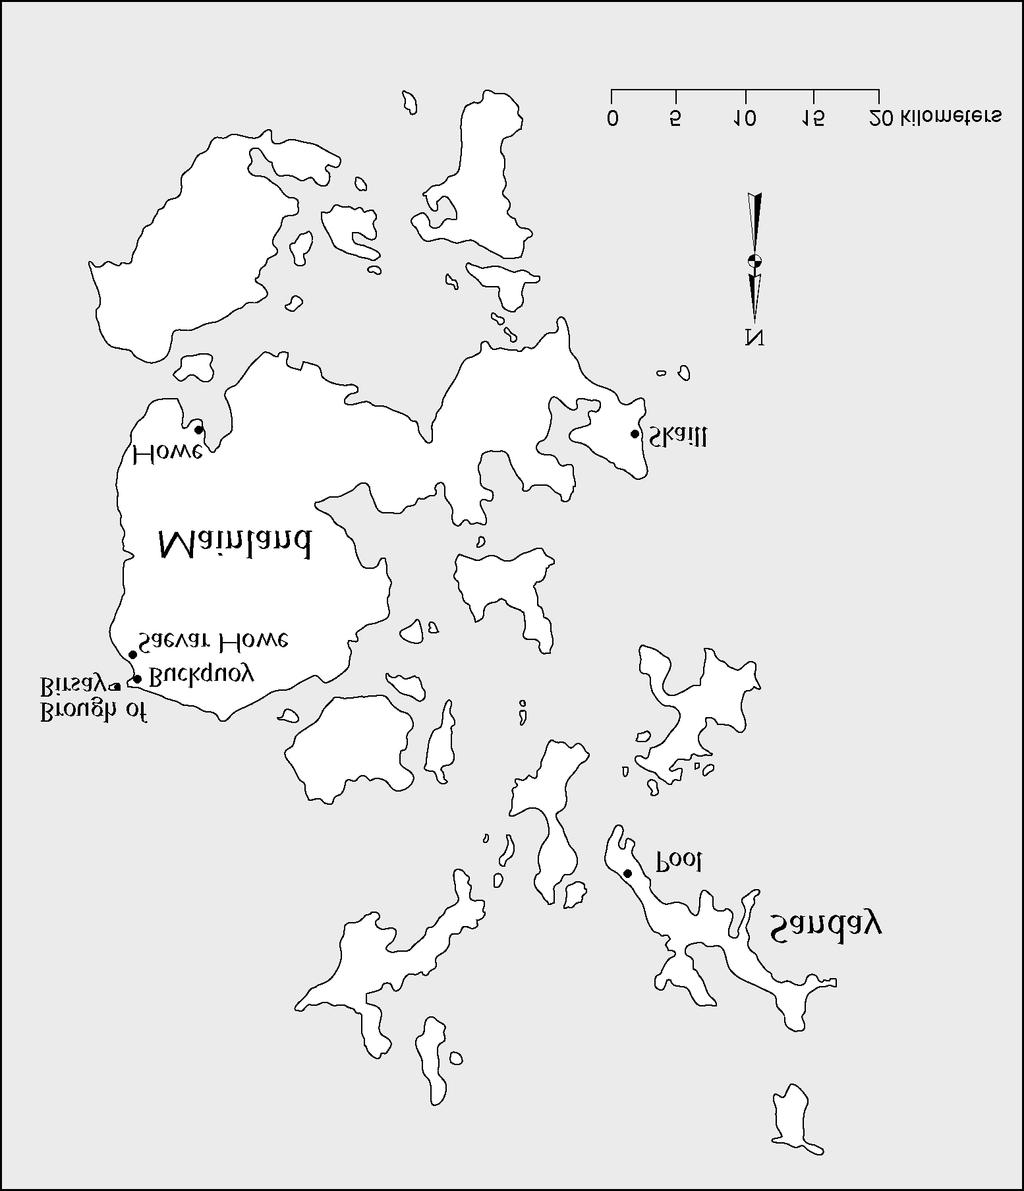 exception to this pattern of settlement is Jarlshof, which was a Pictish site that was used by the Norse in the ninth century. Perhaps Jarlshof was subject to particularly aggressive early settlers.